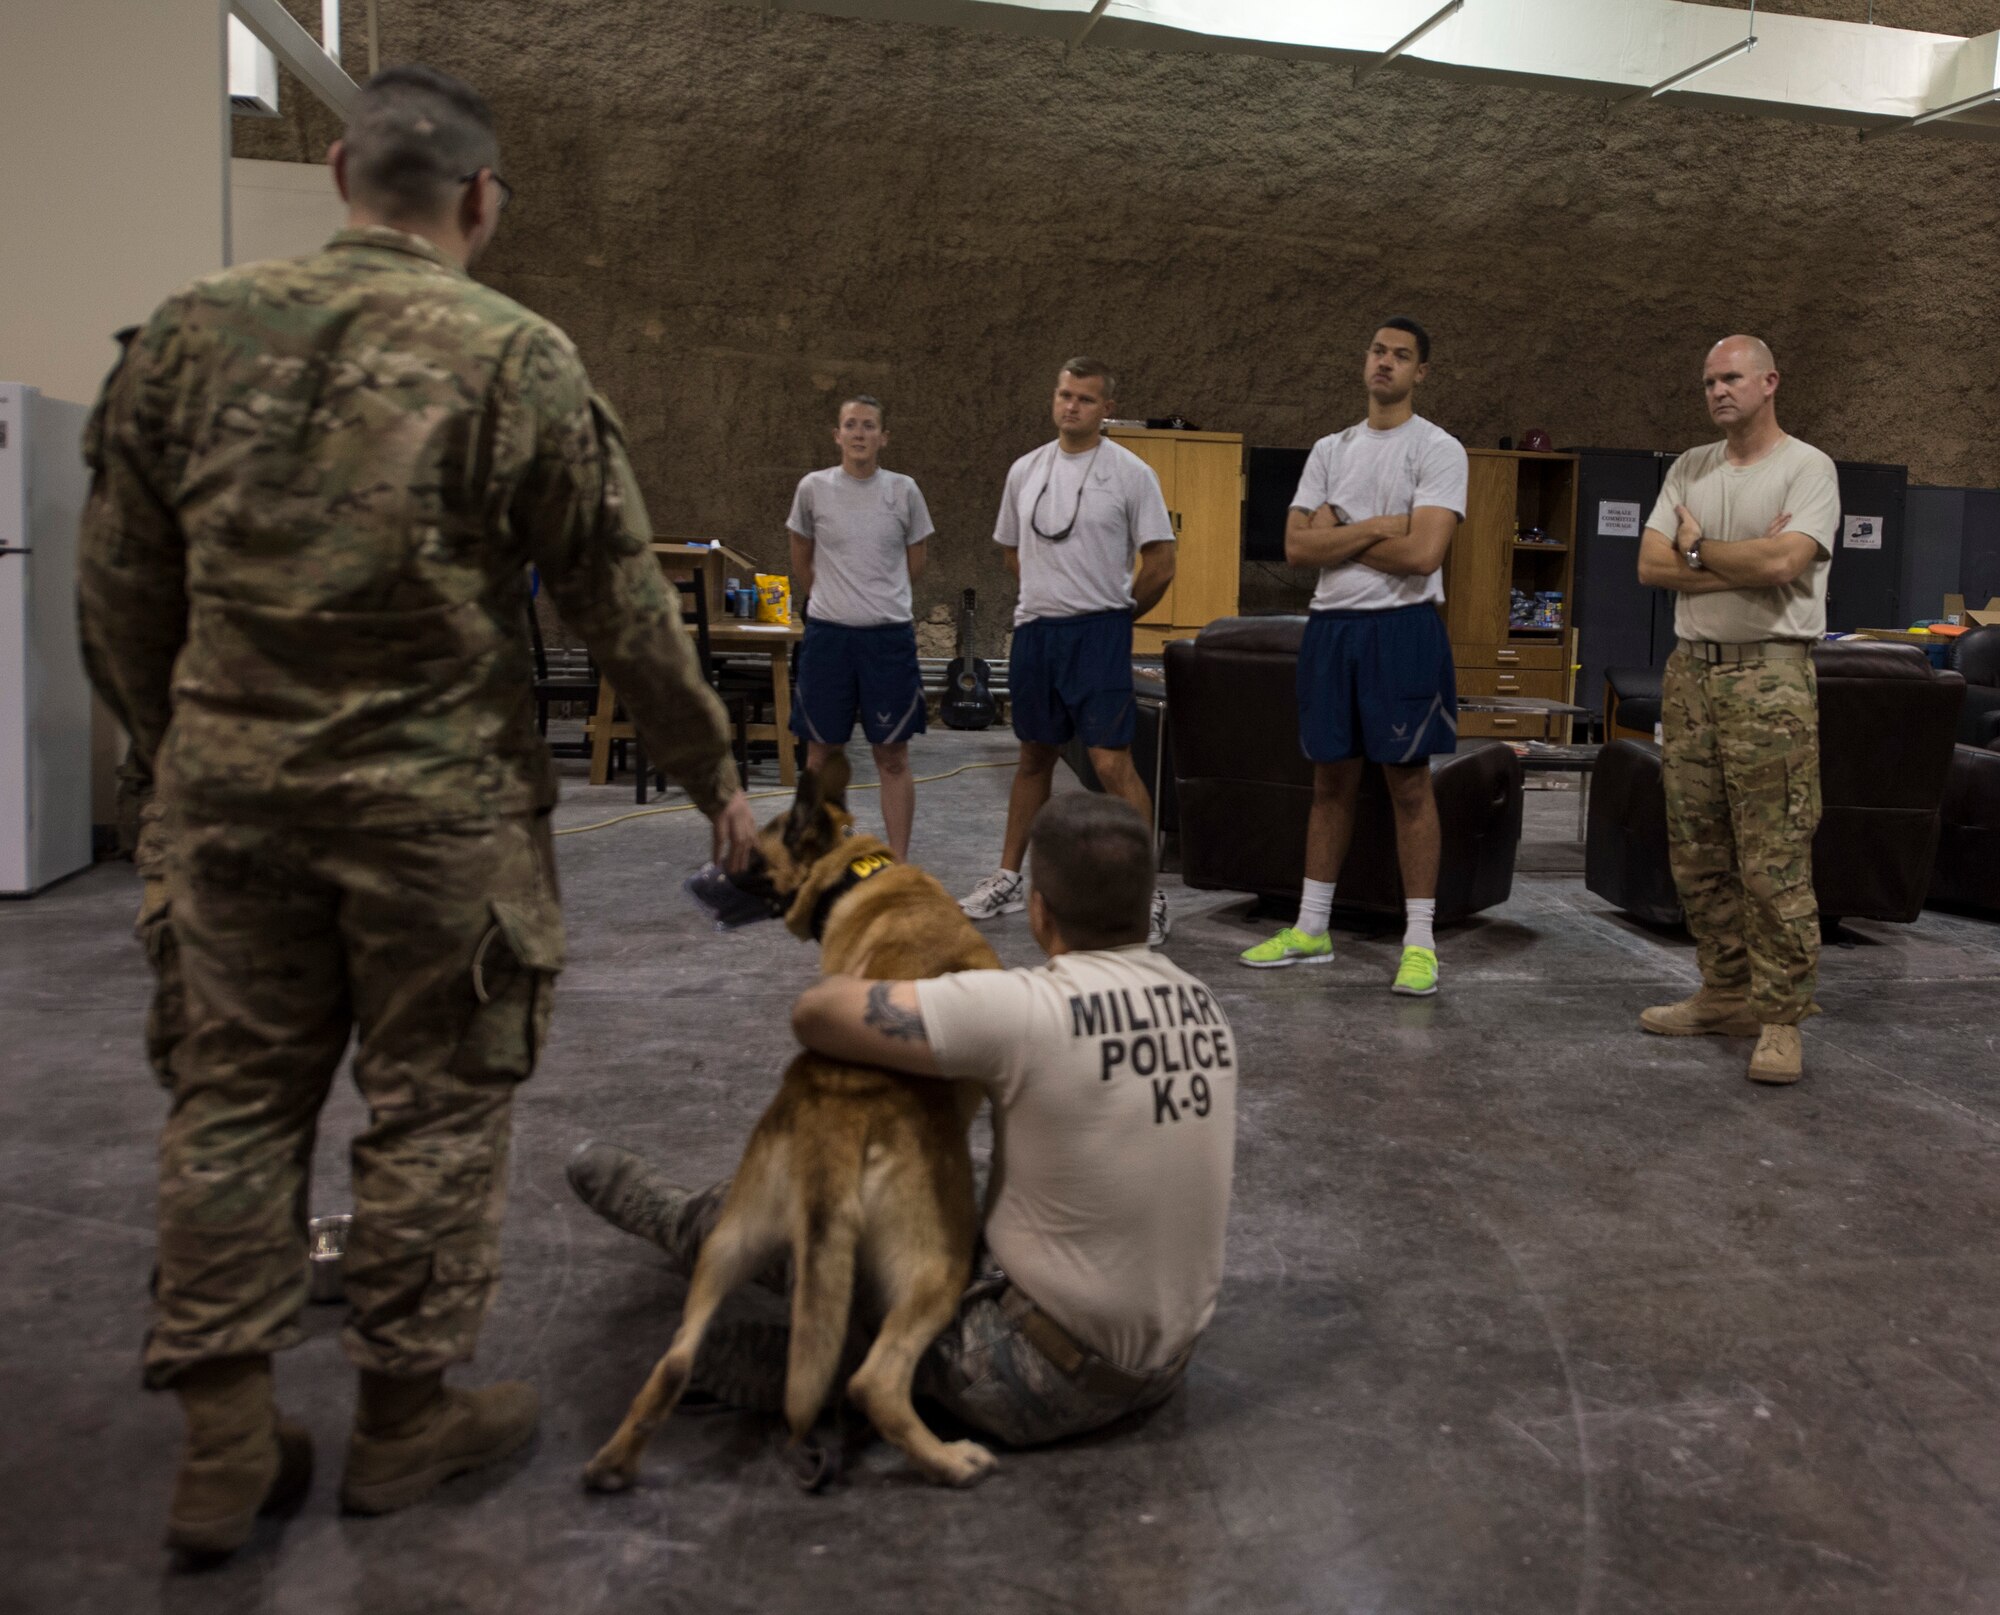 U.S. Army Spc. Ian Orourke, left, 195th Medical Detachment Veterinary Support Services, gives a class at Al Udeid Air Base, Qatar, April 19, 2017. U.S. Air Force Airmen from the 379th Expeditionary Aeromedical Evacuation Squadron attended the class in order to gain a better understanding of a military working dog anatomy so they can help in the event that no veterinary medical staff is available. (U.S. Air Force photo by Tech. Sgt. Amy M. Lovgren)